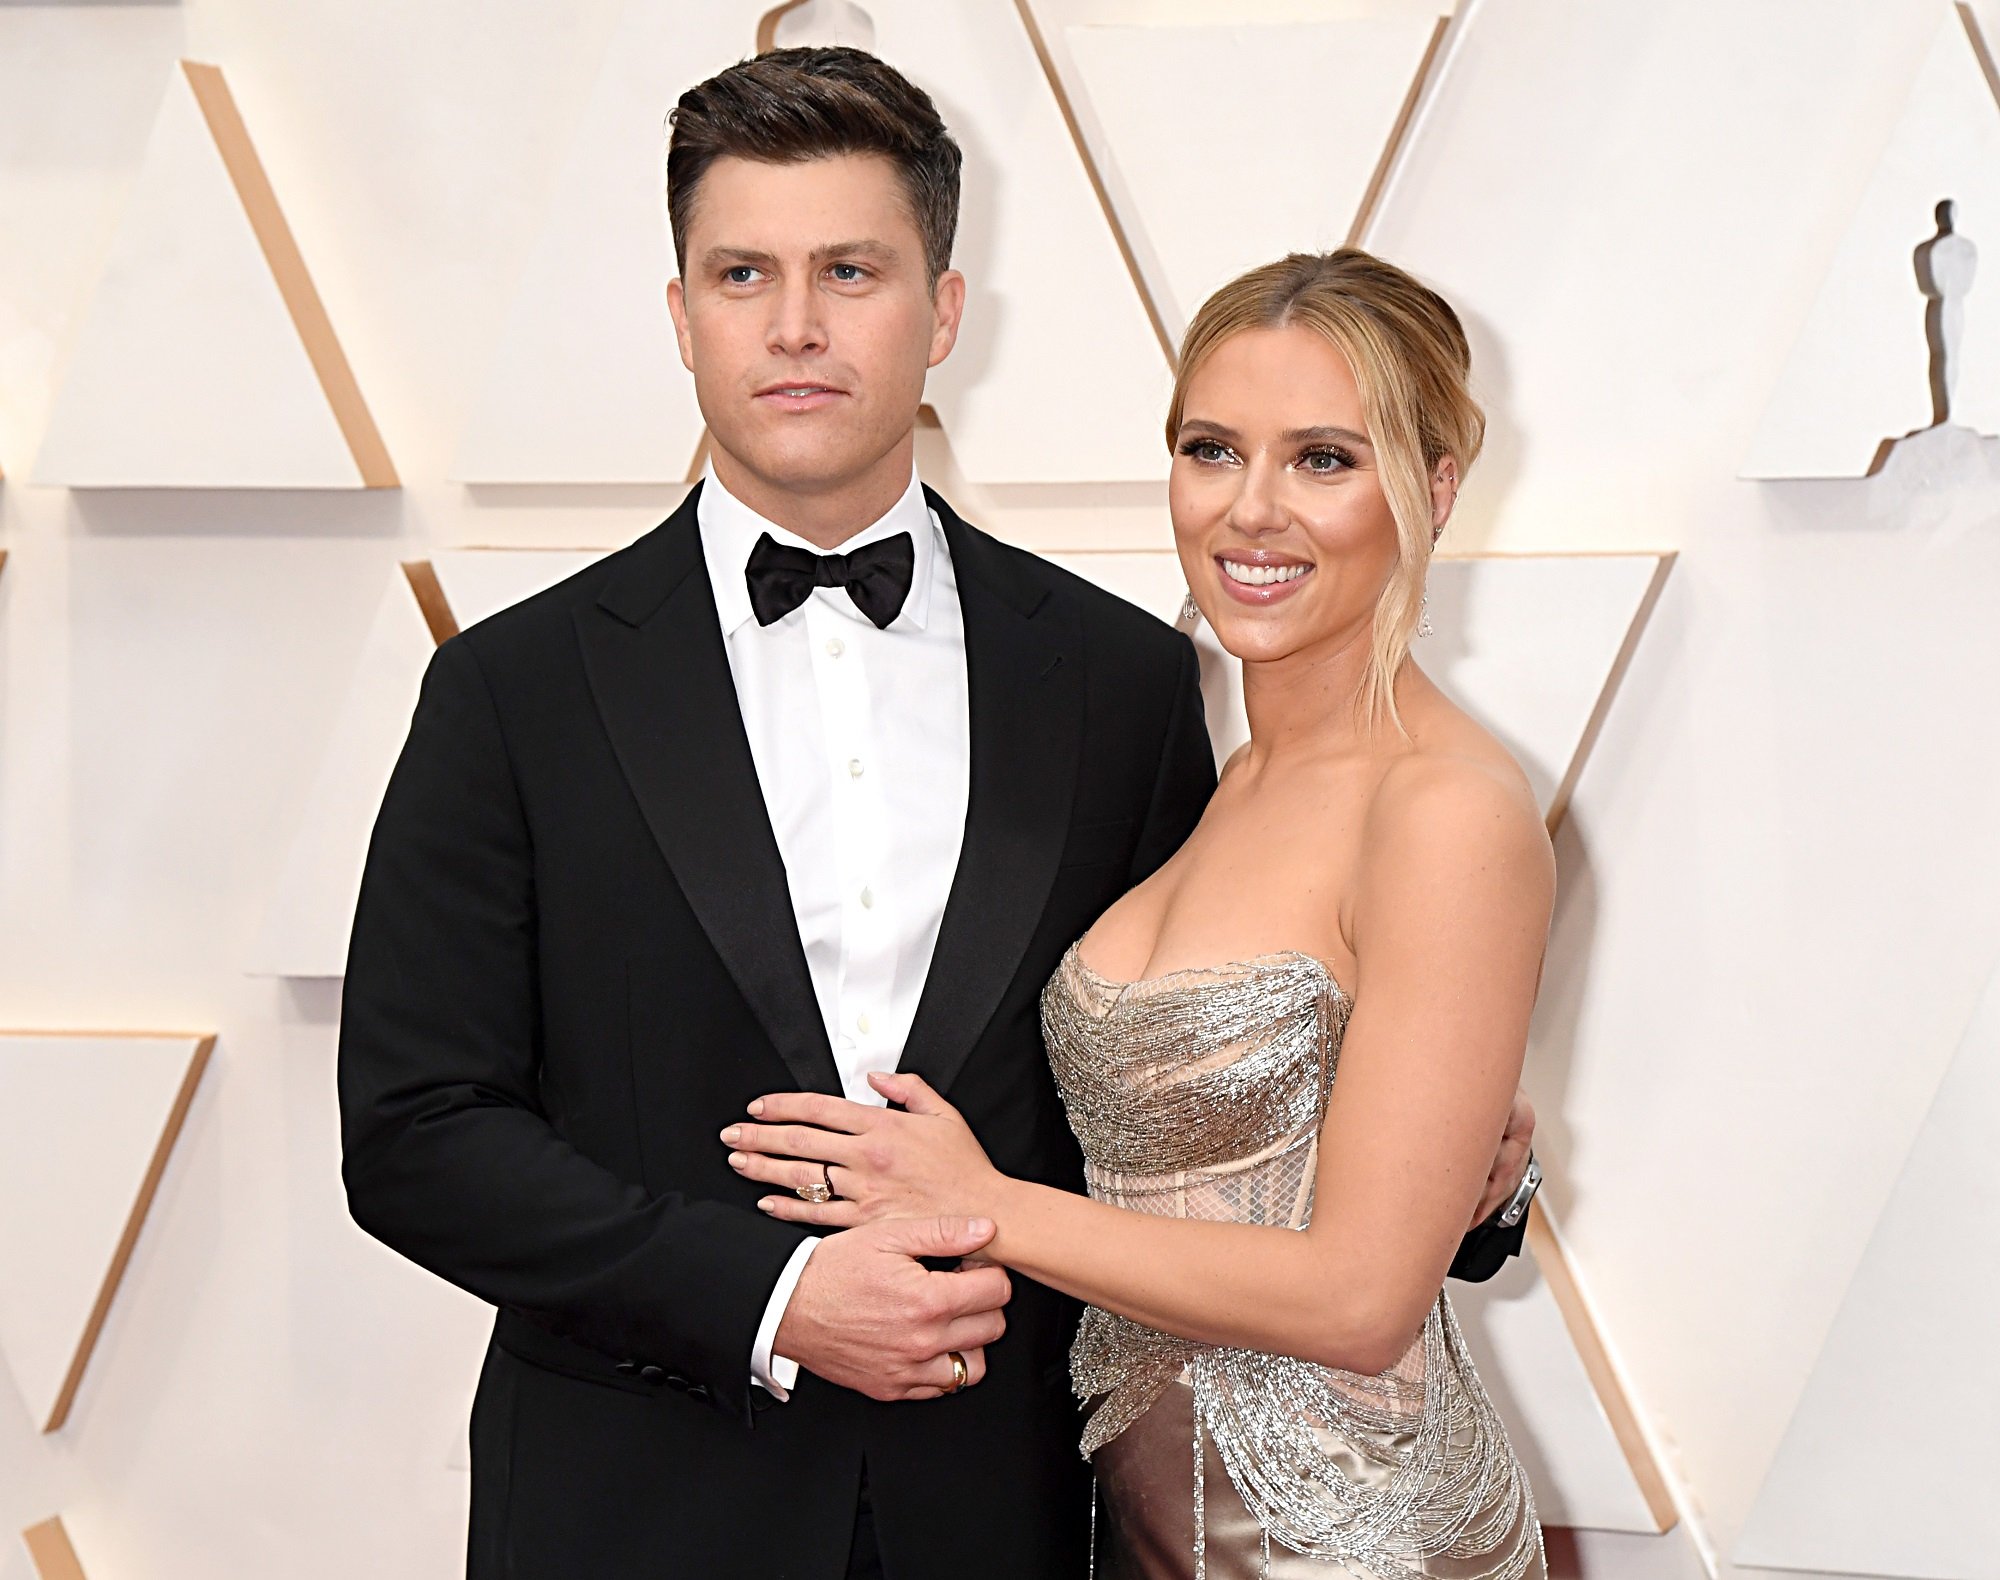 (L-R) Colin Jost and Scarlett Johansson attend the 92nd Annual Academy Awards on February 9, 2020